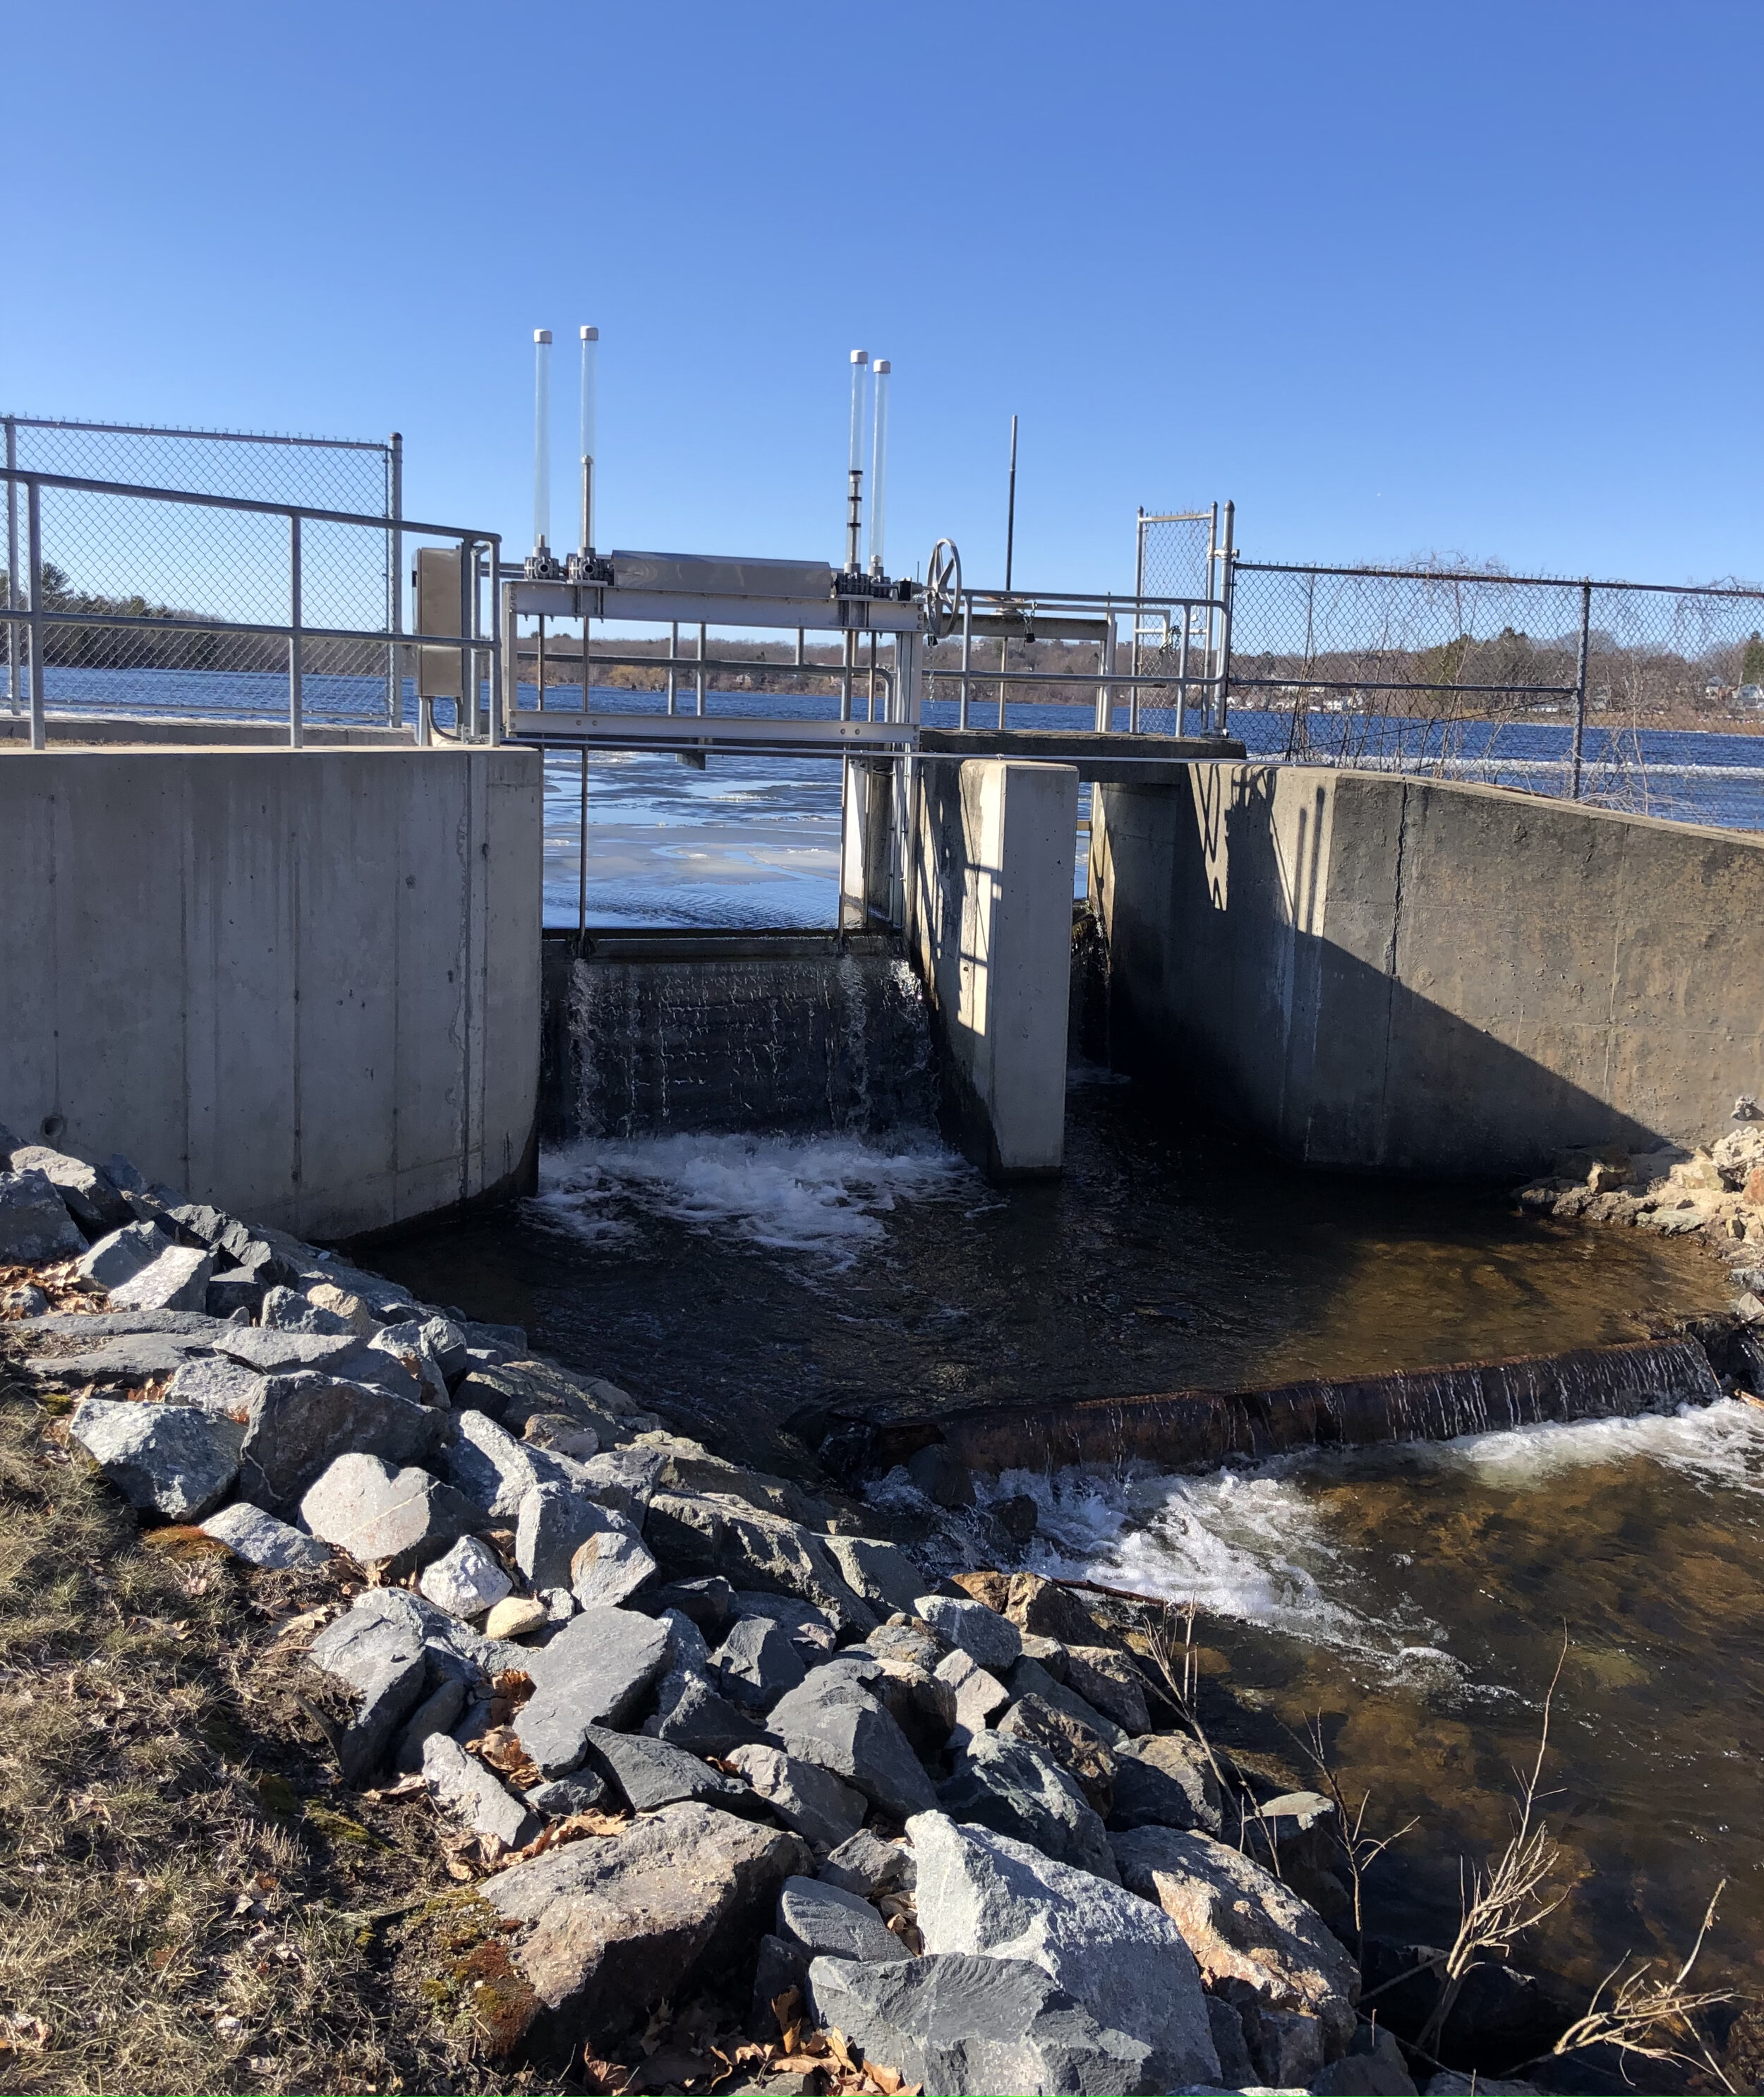 Scalley Dam creates a barrier that the herring cannot get over